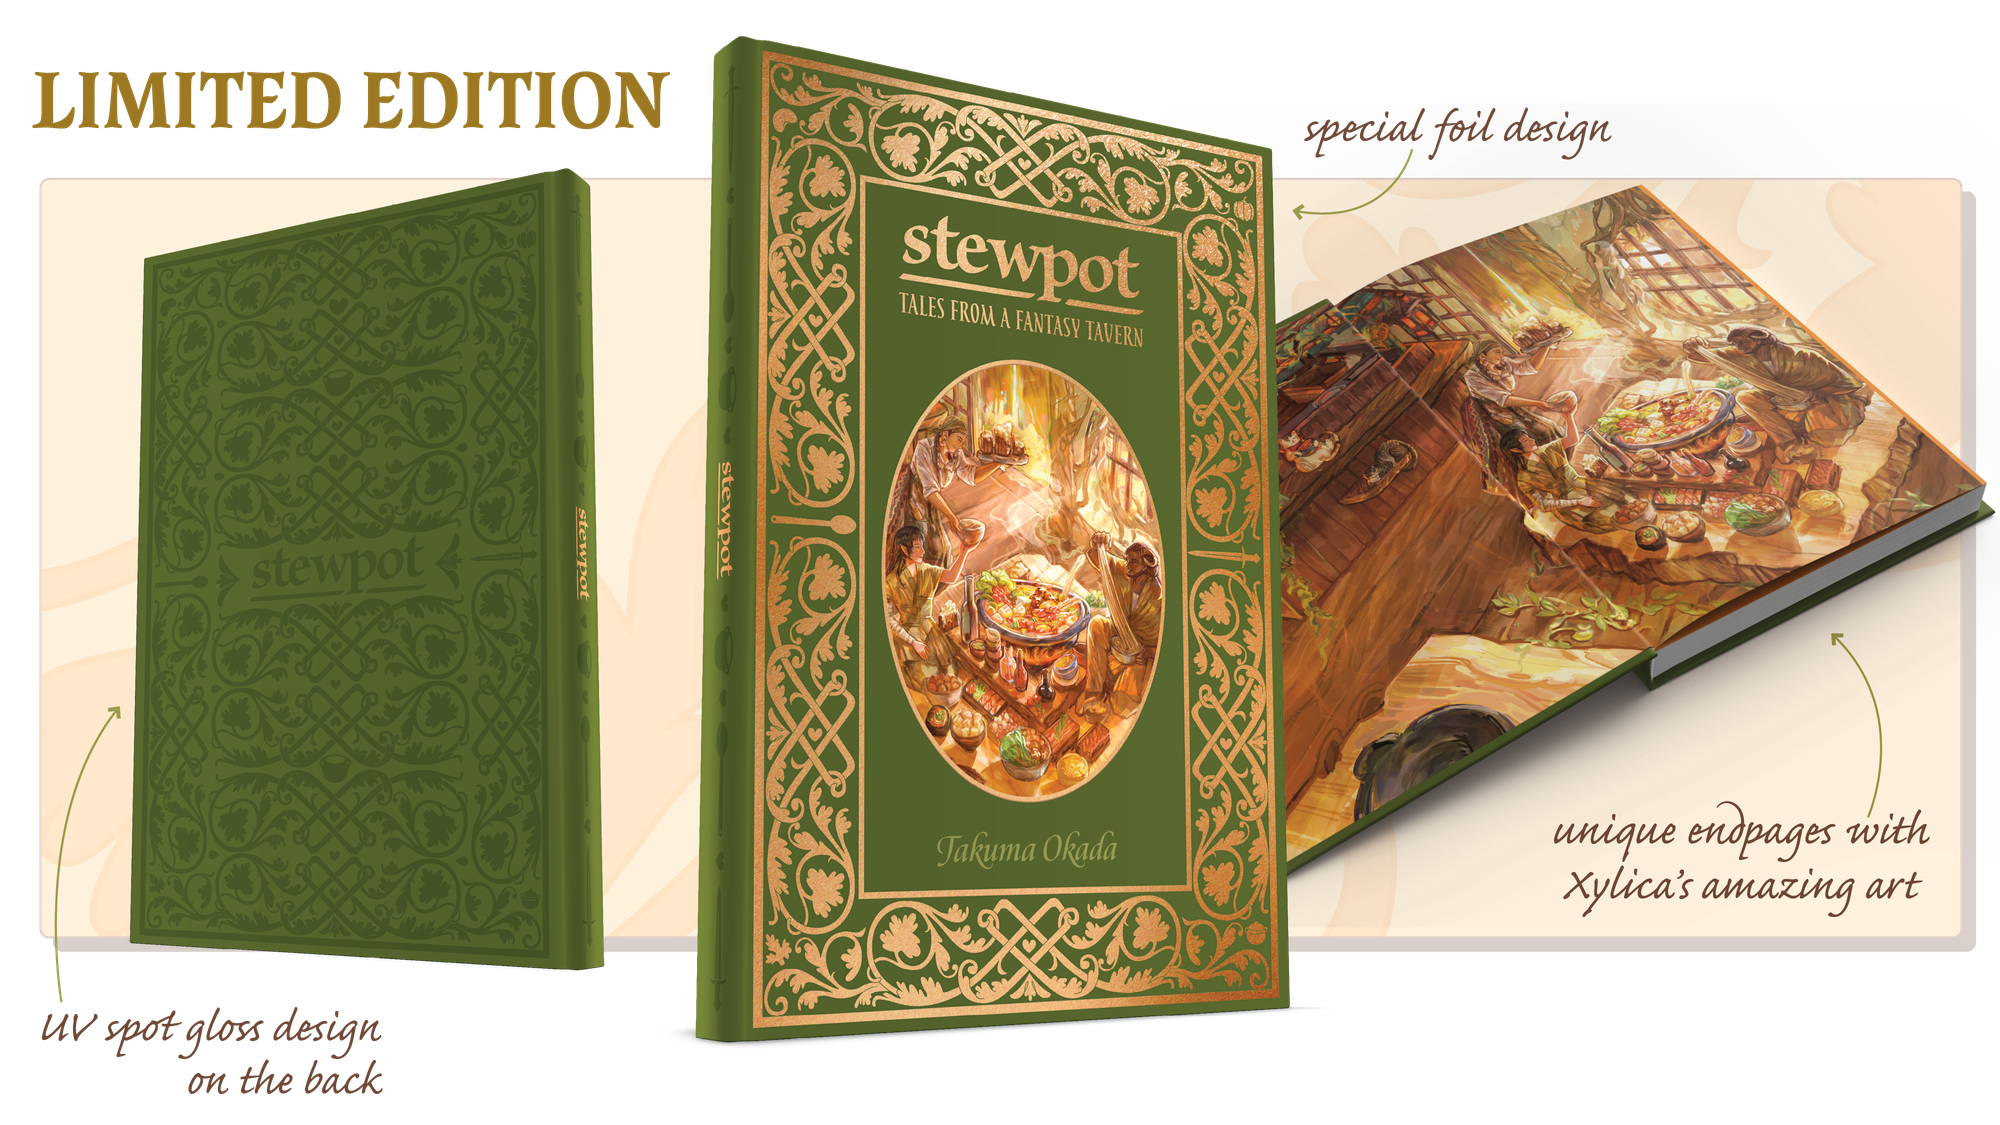 Green spot gloss and foil hardcover limited edition of Stewpot, with art of the tavern by Xylica